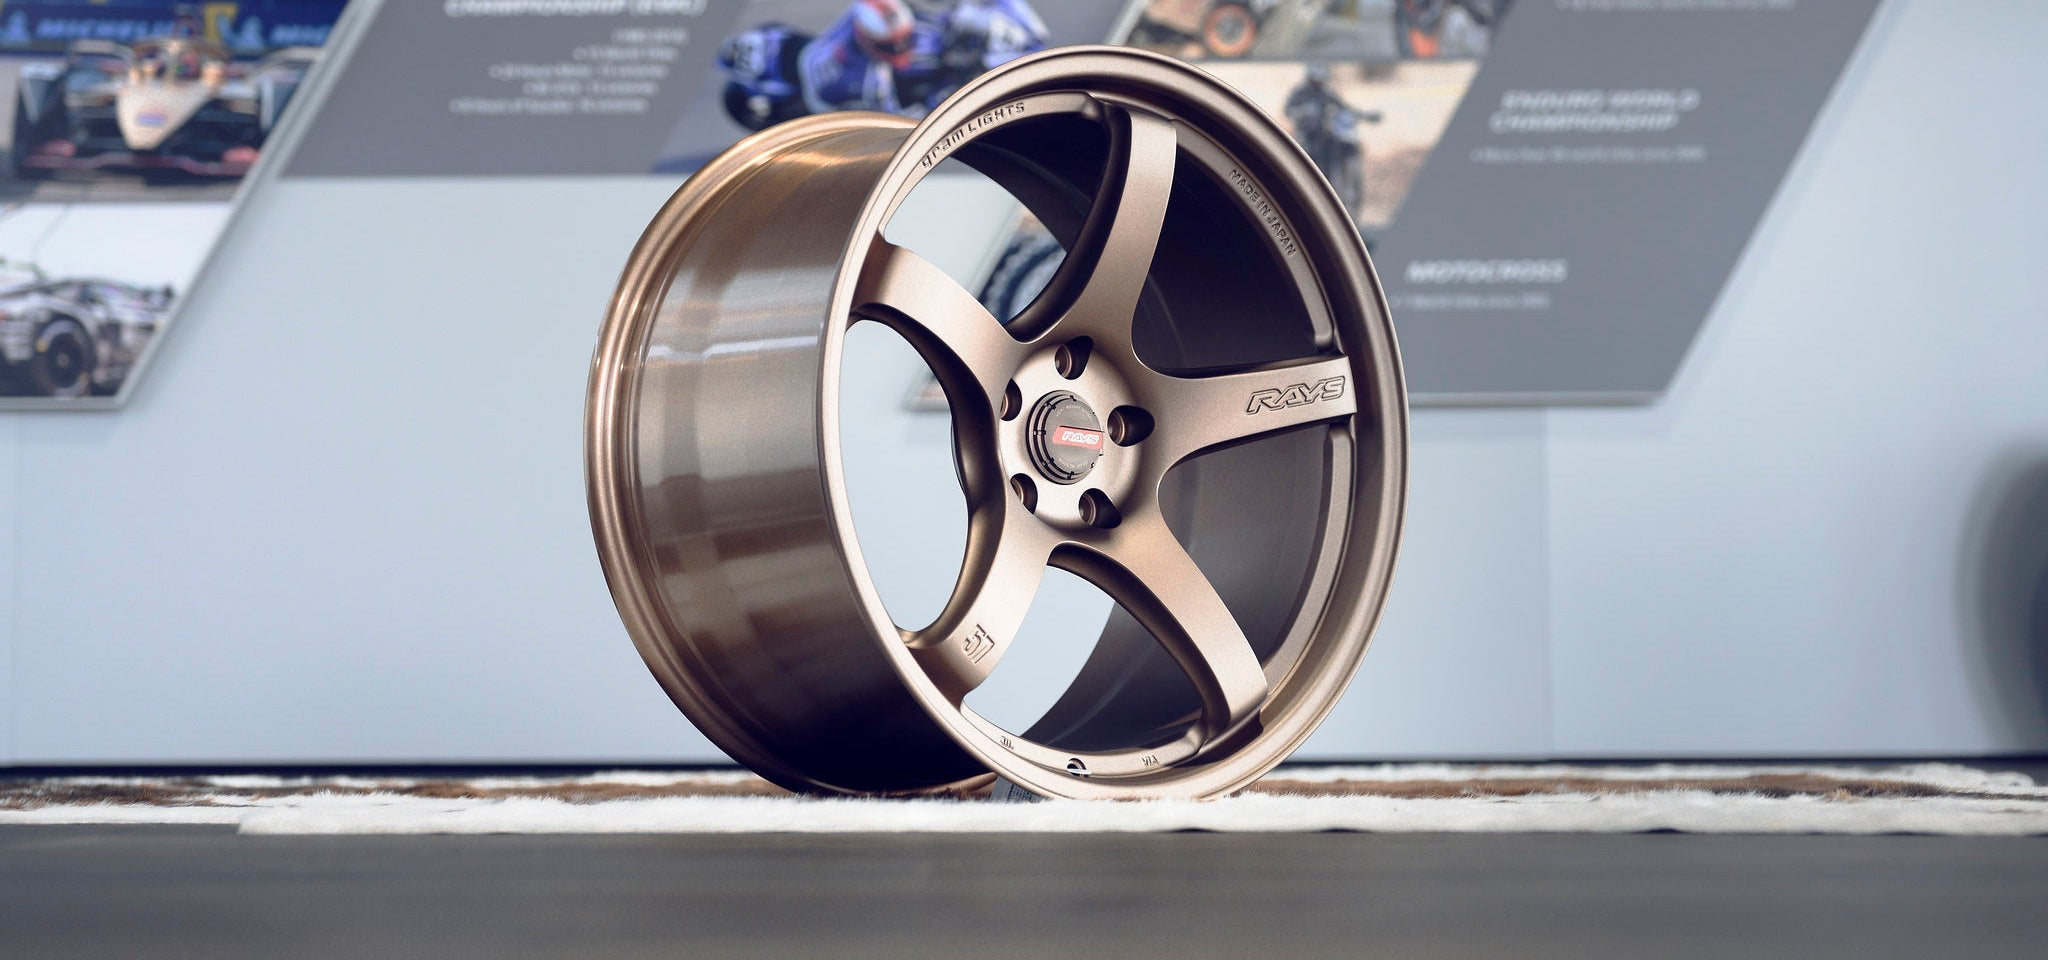 gramLIGHTS 57CR 17" - Premium Wheels from Gram Lights - From just $2000.00! Shop now at MK MOTORSPORTS